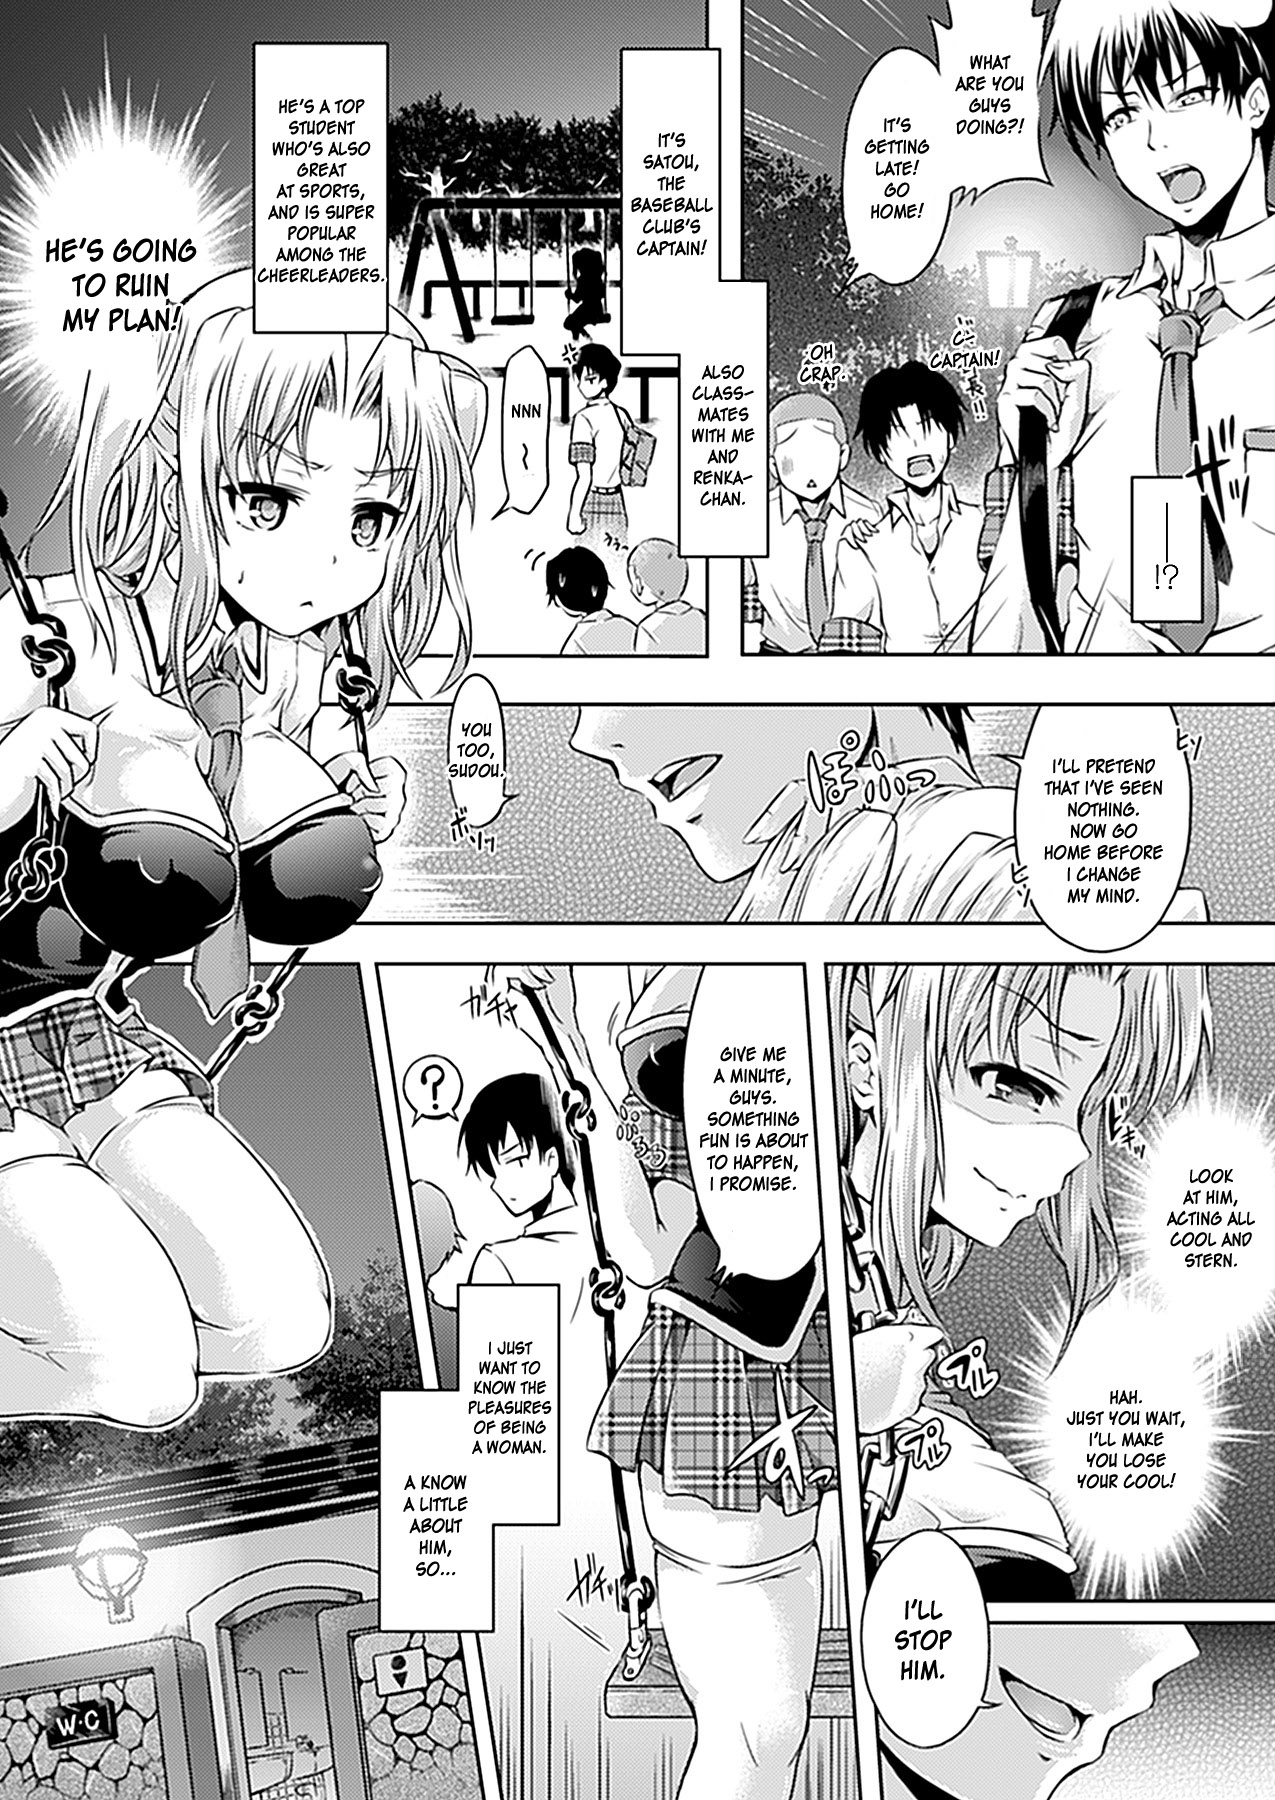 [Taniguchi-san] Transform into Anything, Anywhere Ch. 1-2 [Eng] {doujin-moe.us} page 22 full